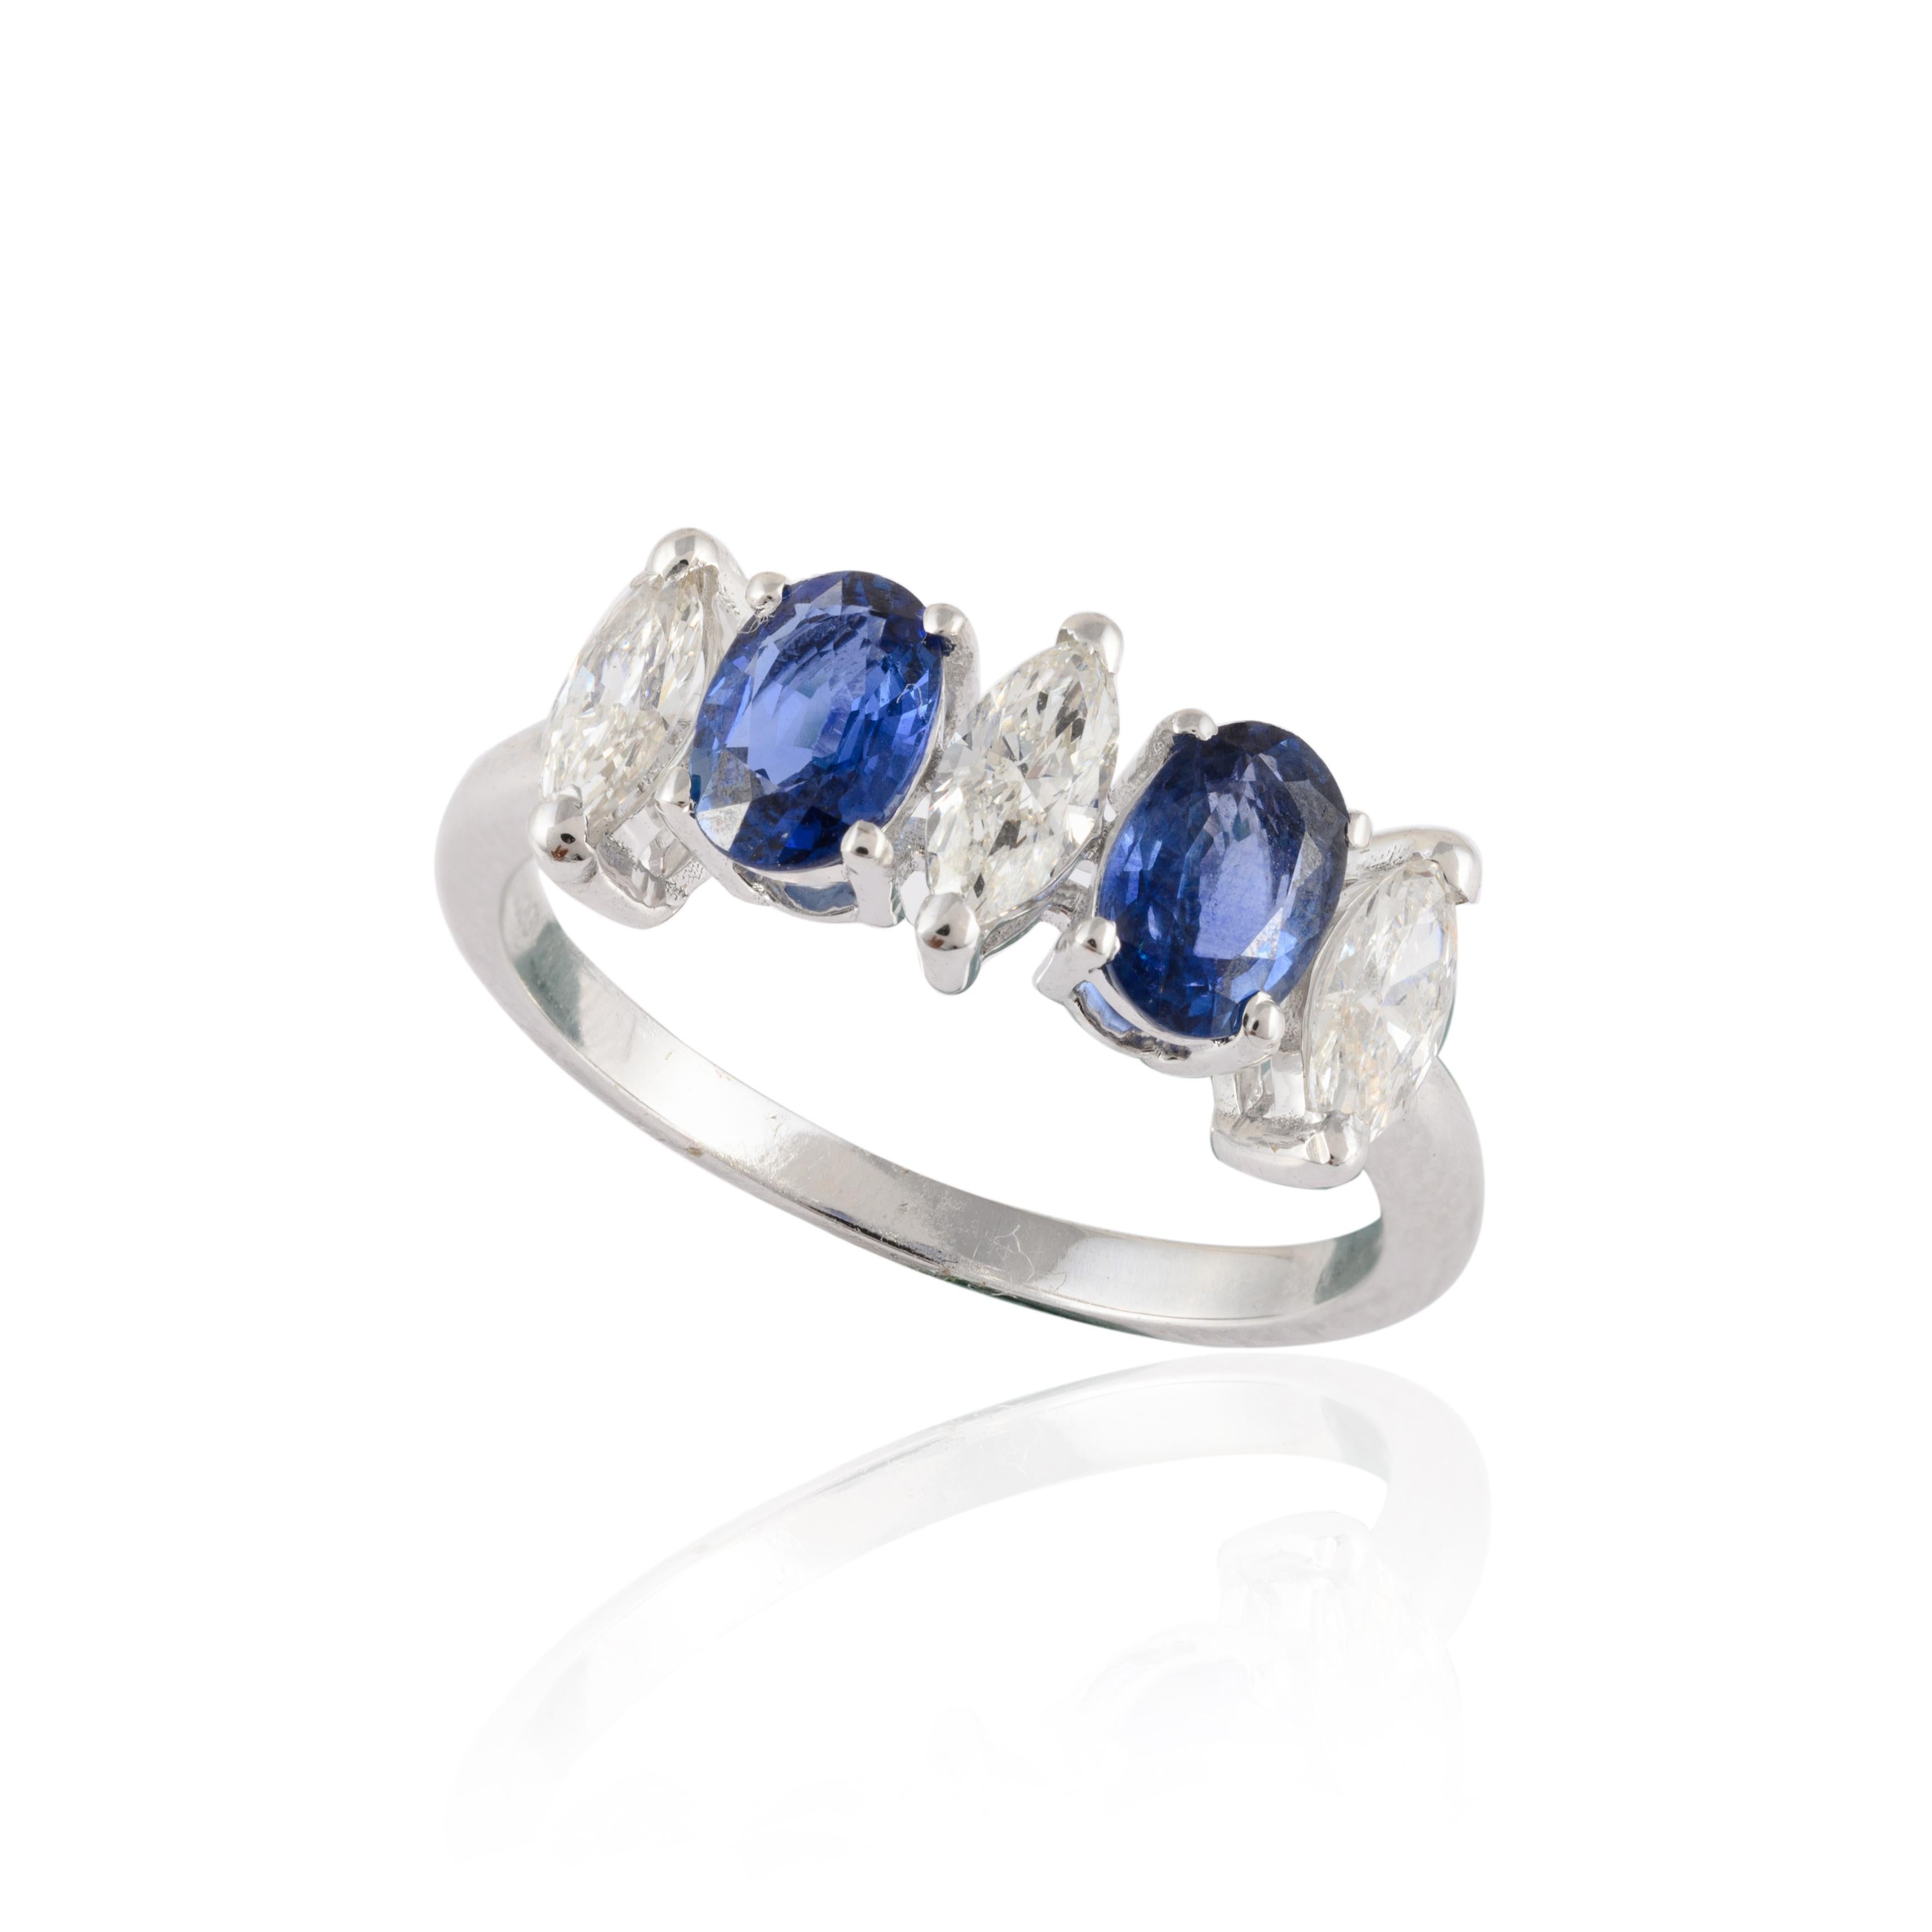 For Sale:  Stunning Diamond Blue Sapphire Engagement Ring For Her in Solid 18kt White Gold 8